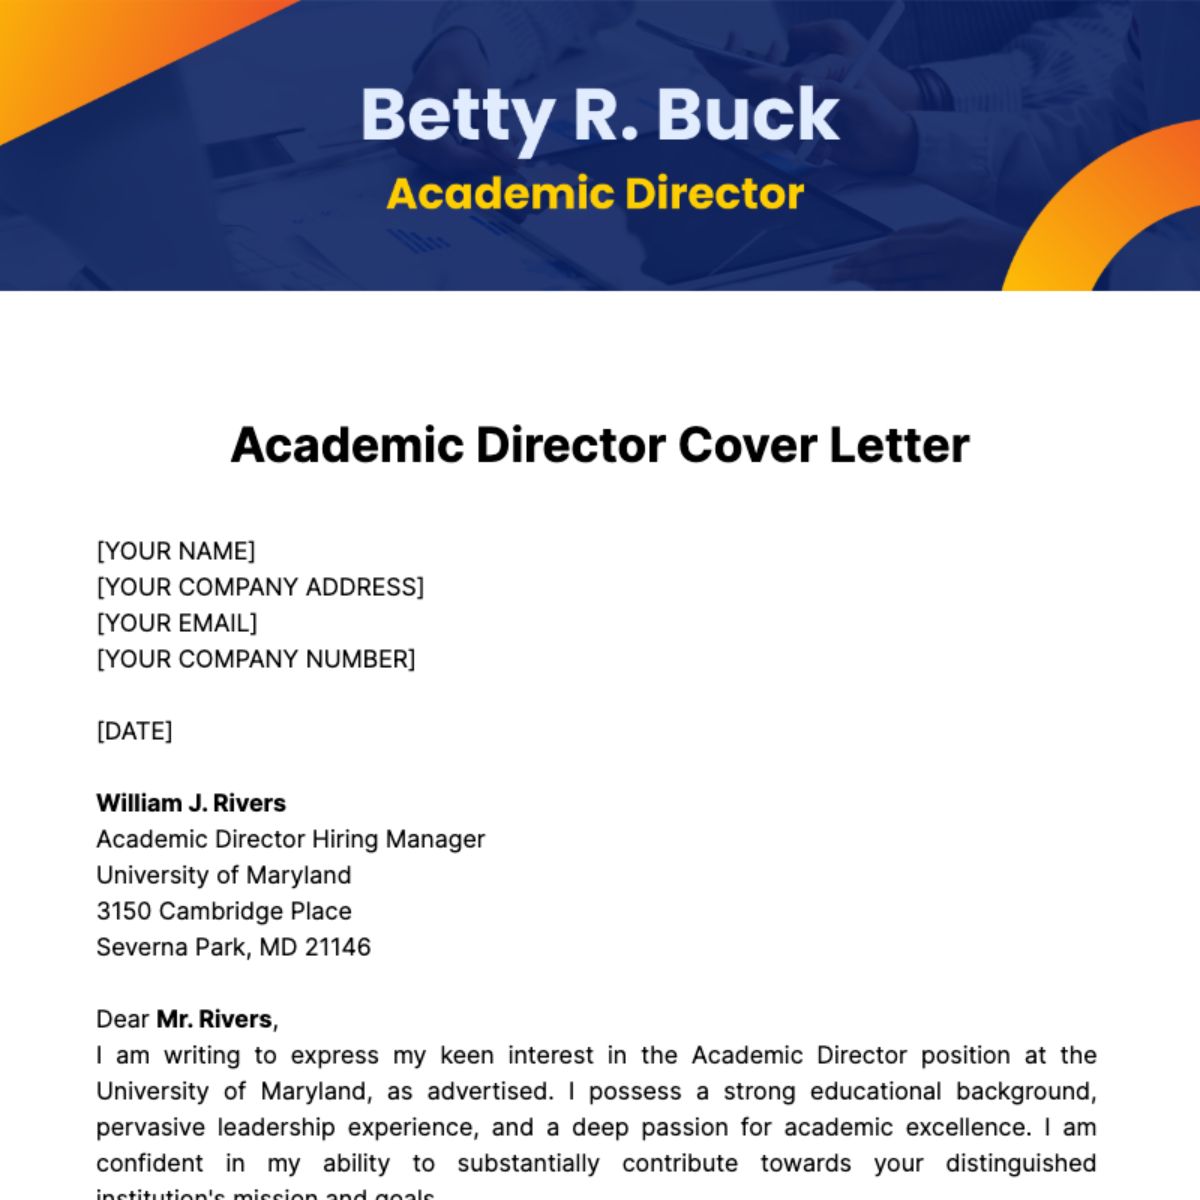 Academic Director Cover Letter Template